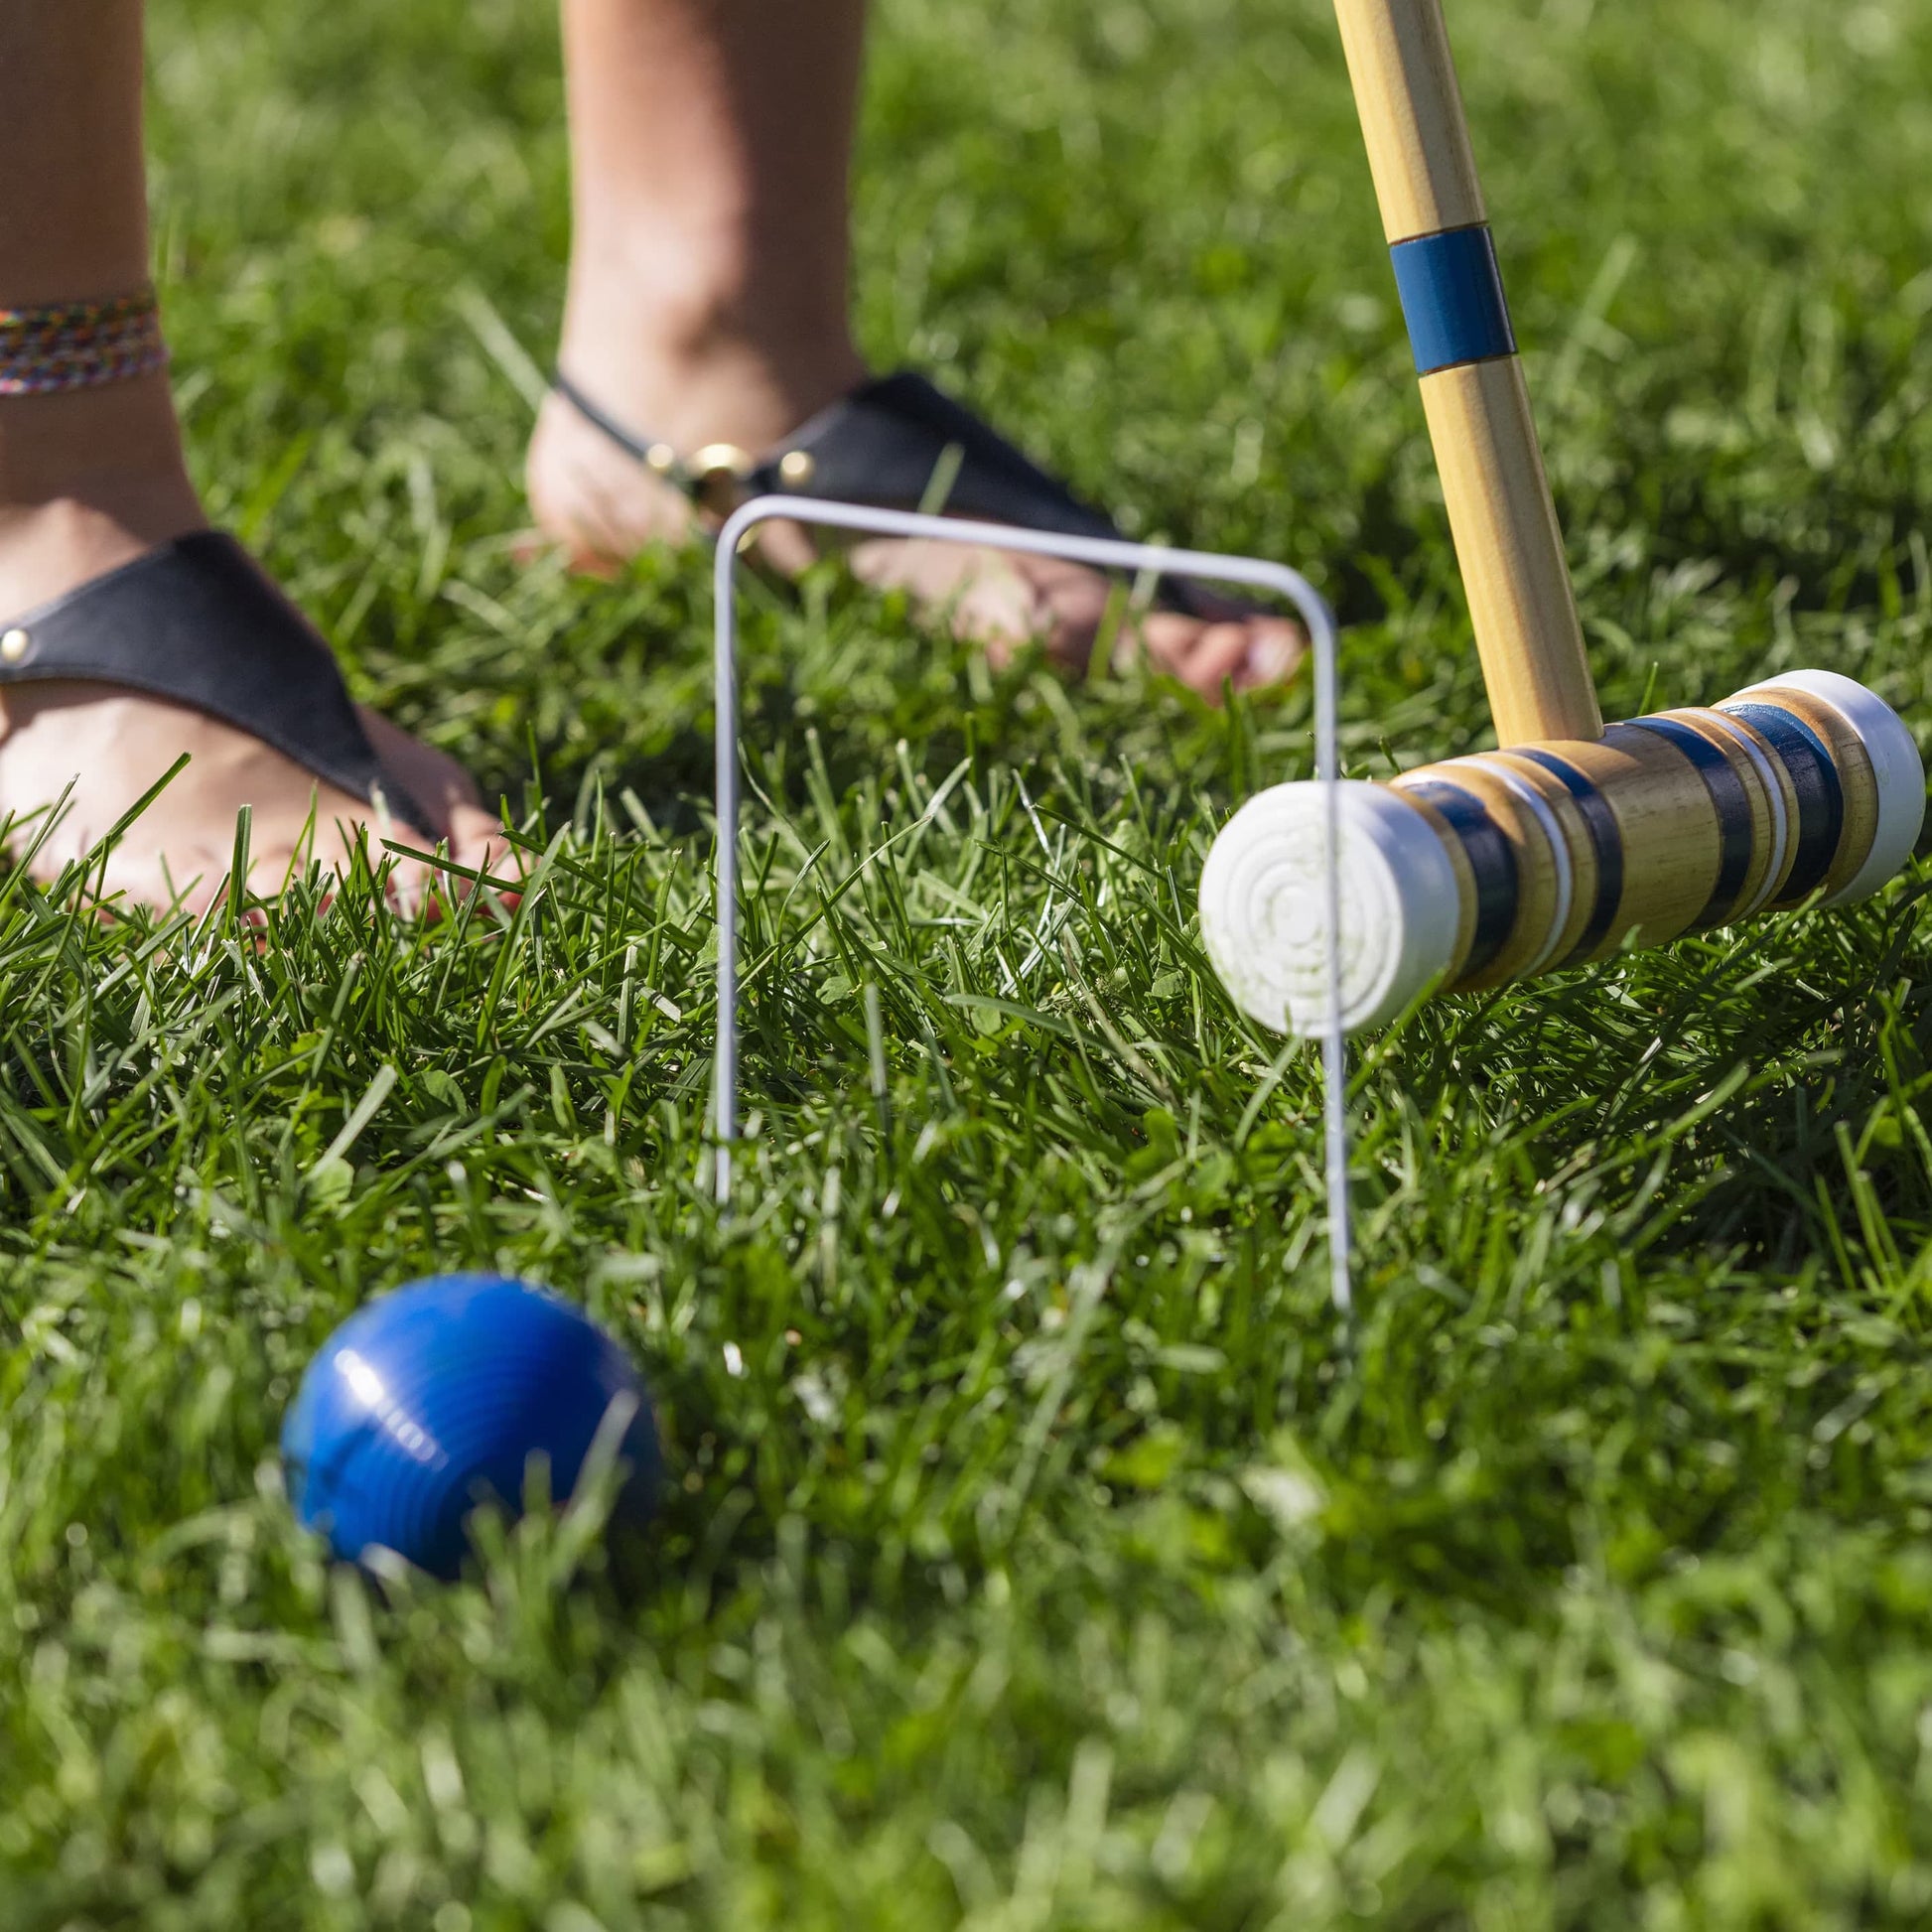 Sportcraft Croquet Set Lifestyle Image, Woman playing Croquet in a park, closeup of ball on grass